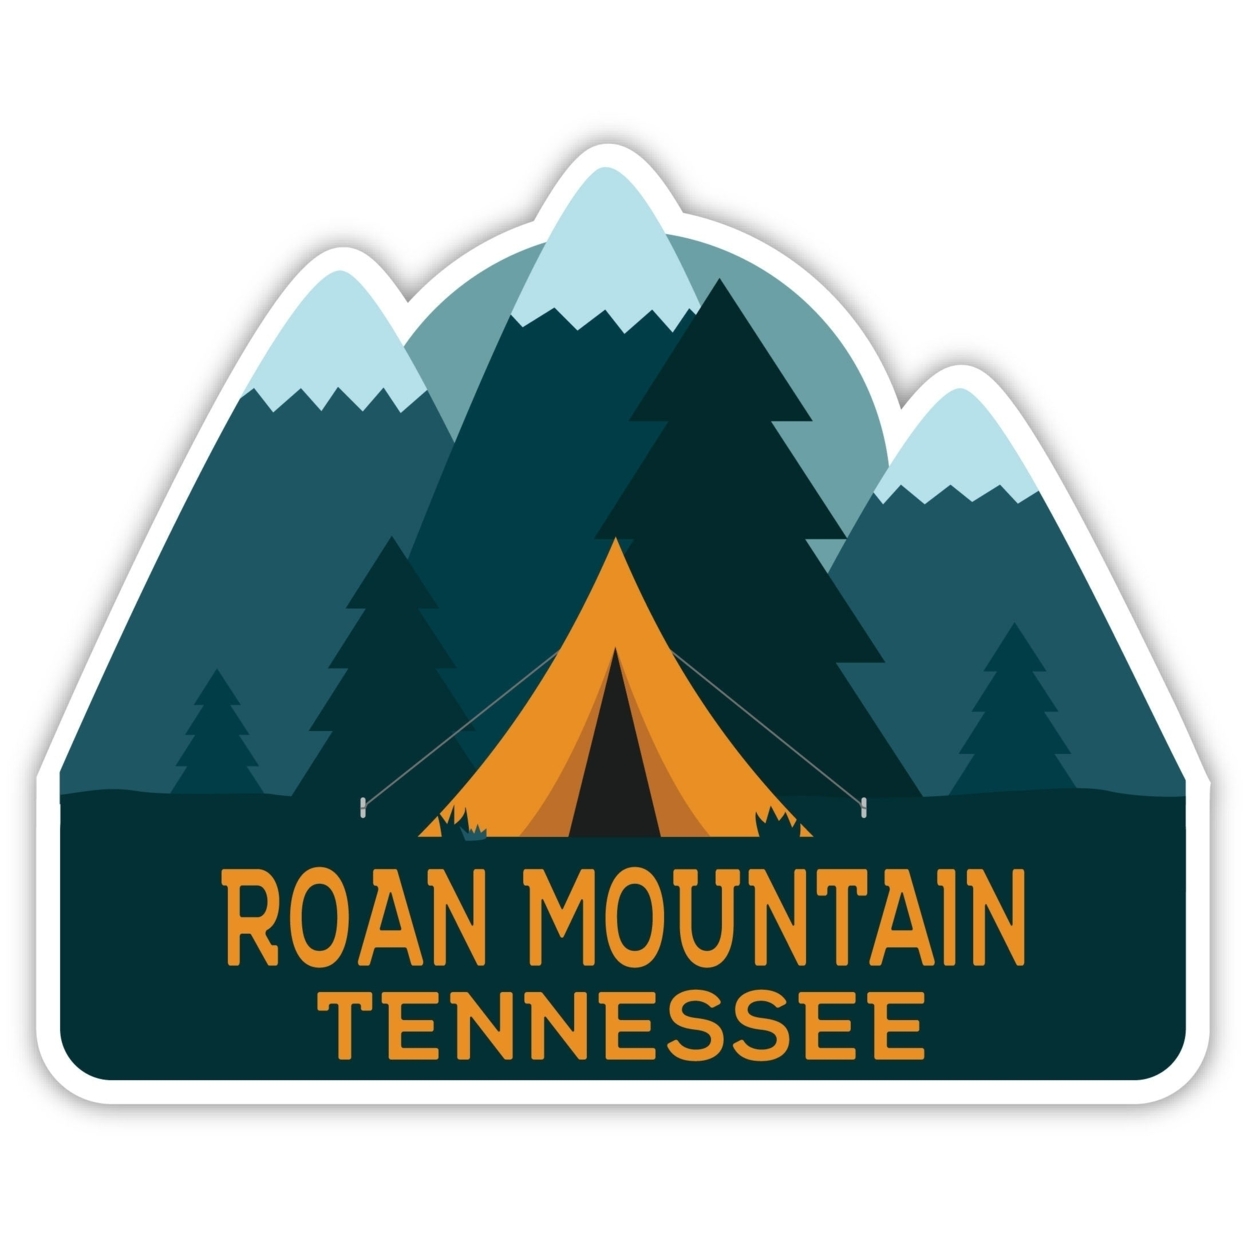 Roan Mountain Tennessee Souvenir Decorative Stickers (Choose Theme And Size) - Single Unit, 4-Inch, Great Outdoors